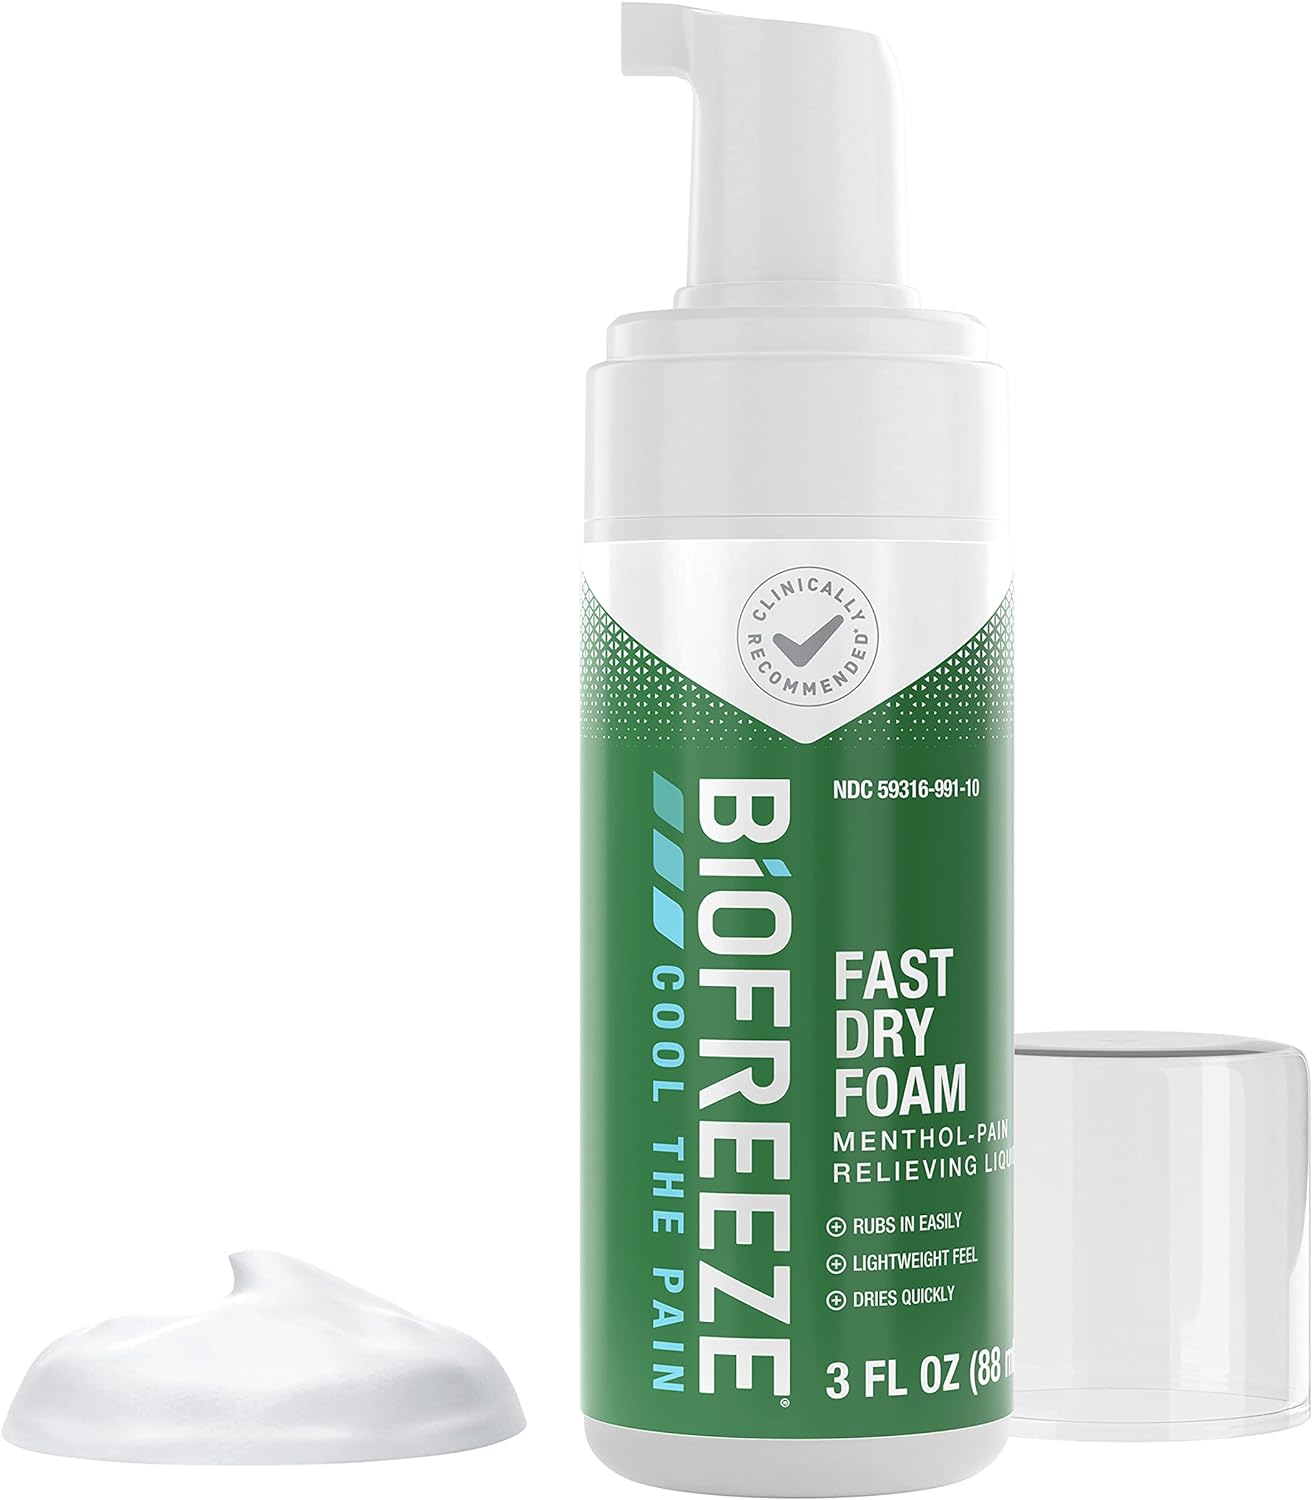 Biofreeze Menthol Pain Relieving Foam 3 FL OZ For Pain Relief Of Sore Muscles, Arthritis, Simple Backaches, And Joint Pain. Fast Drying, Lightweight, Powerful Topical Pain Reliever (Package May Vary)